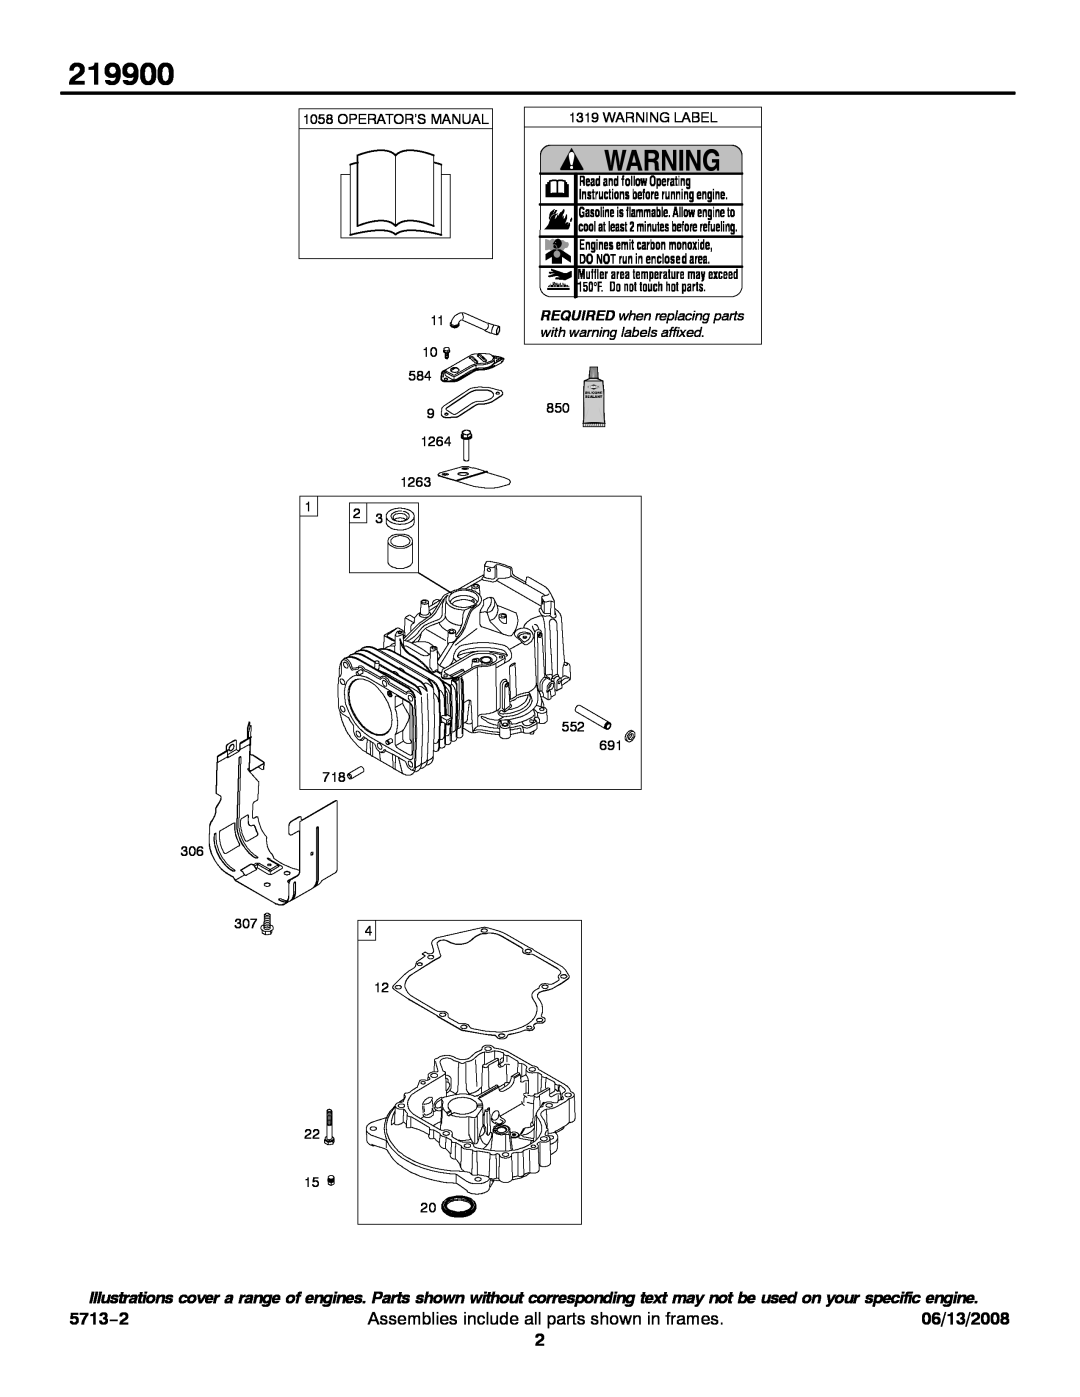 Snapper 219900 service manual 5713−2, Assemblies include all parts shown in frames, 06/13/2008 